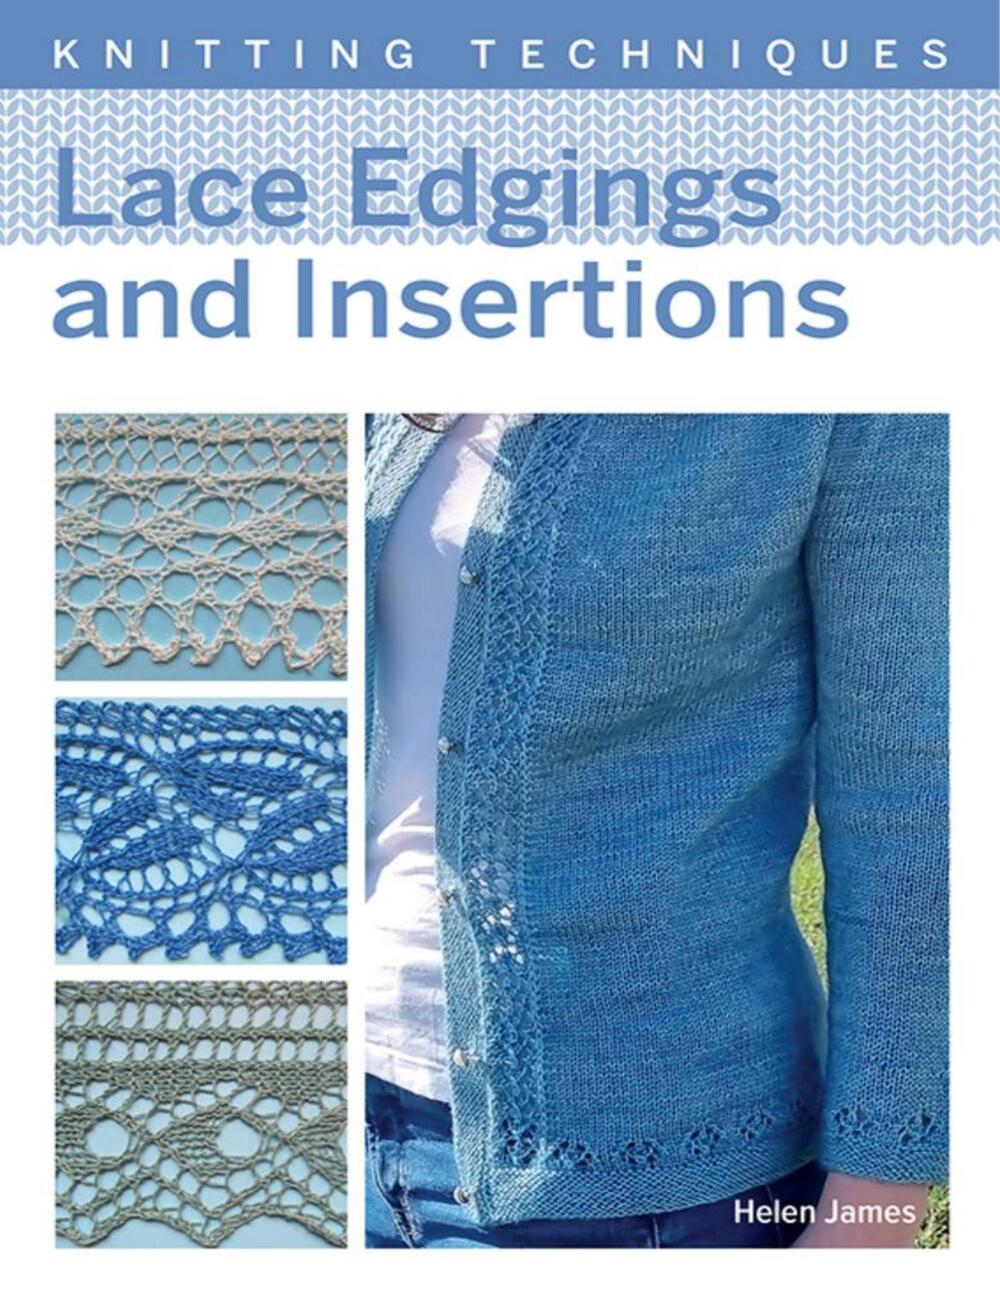 lace-edgings-and-insertion-knitting-techniques-212